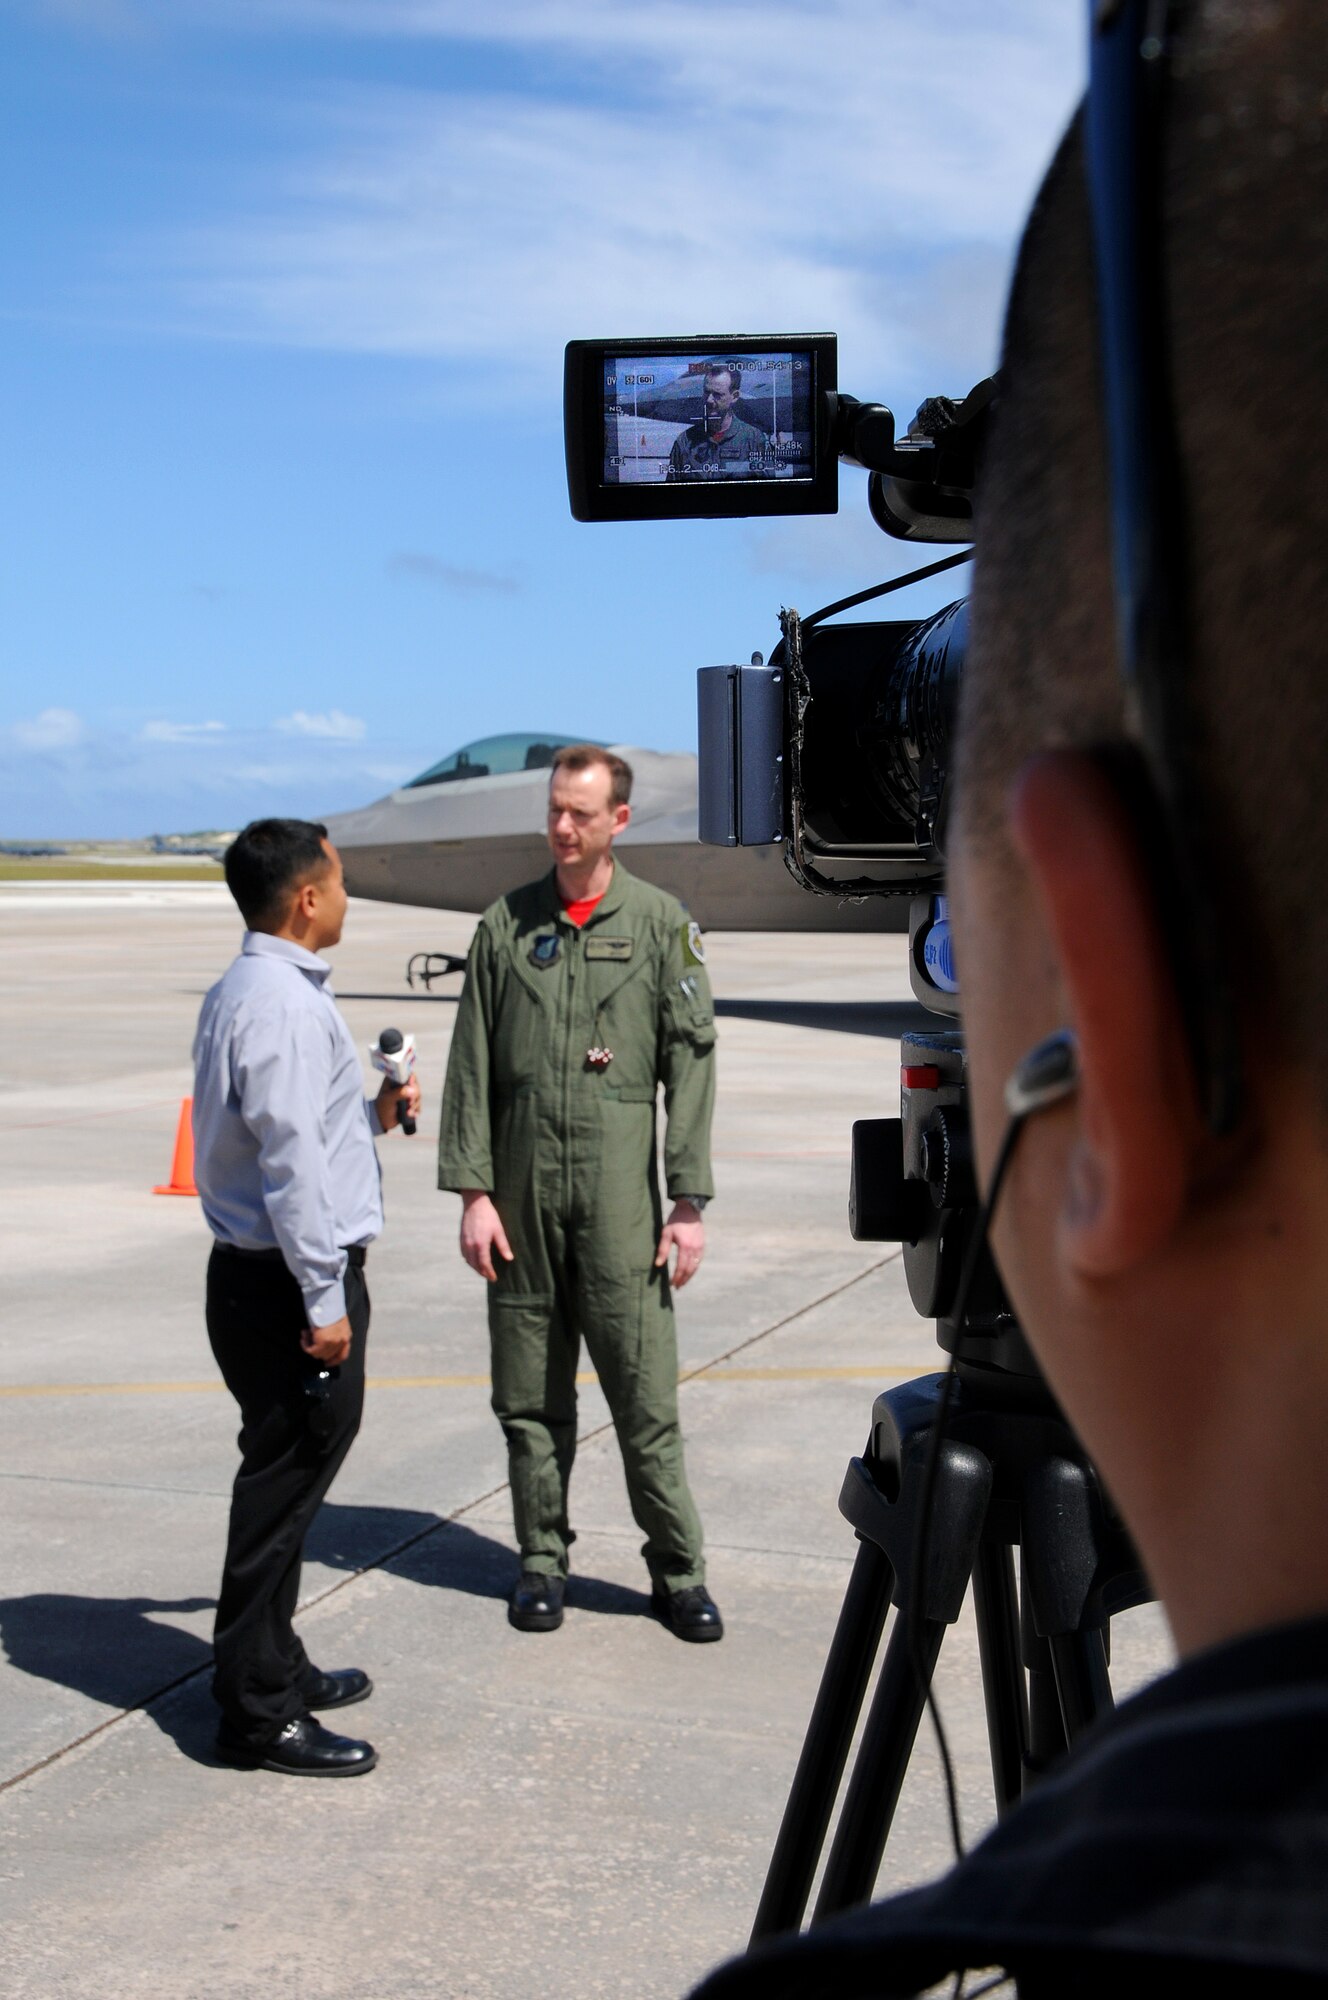 ANDERSEN AIR FORCE BASE, Guam - A camera man for Pacific News Center records an interview with Lt. Col. Chris Niemi, 90th Expeditionary Fighter Squadron Director of Operations, here Jan. 23. Media had the opportunity to conduct an interview with a Colonel Niemi and Staff Sgt. Andrew Fowler, a maintainer, as well as capture video and photo images.  The 90th Expeditionary Fighter Squadron deployed to Andersen with 12 F-22 Raptors. (U.S. Air Force photo by Airman 1st Class Courtney Witt)